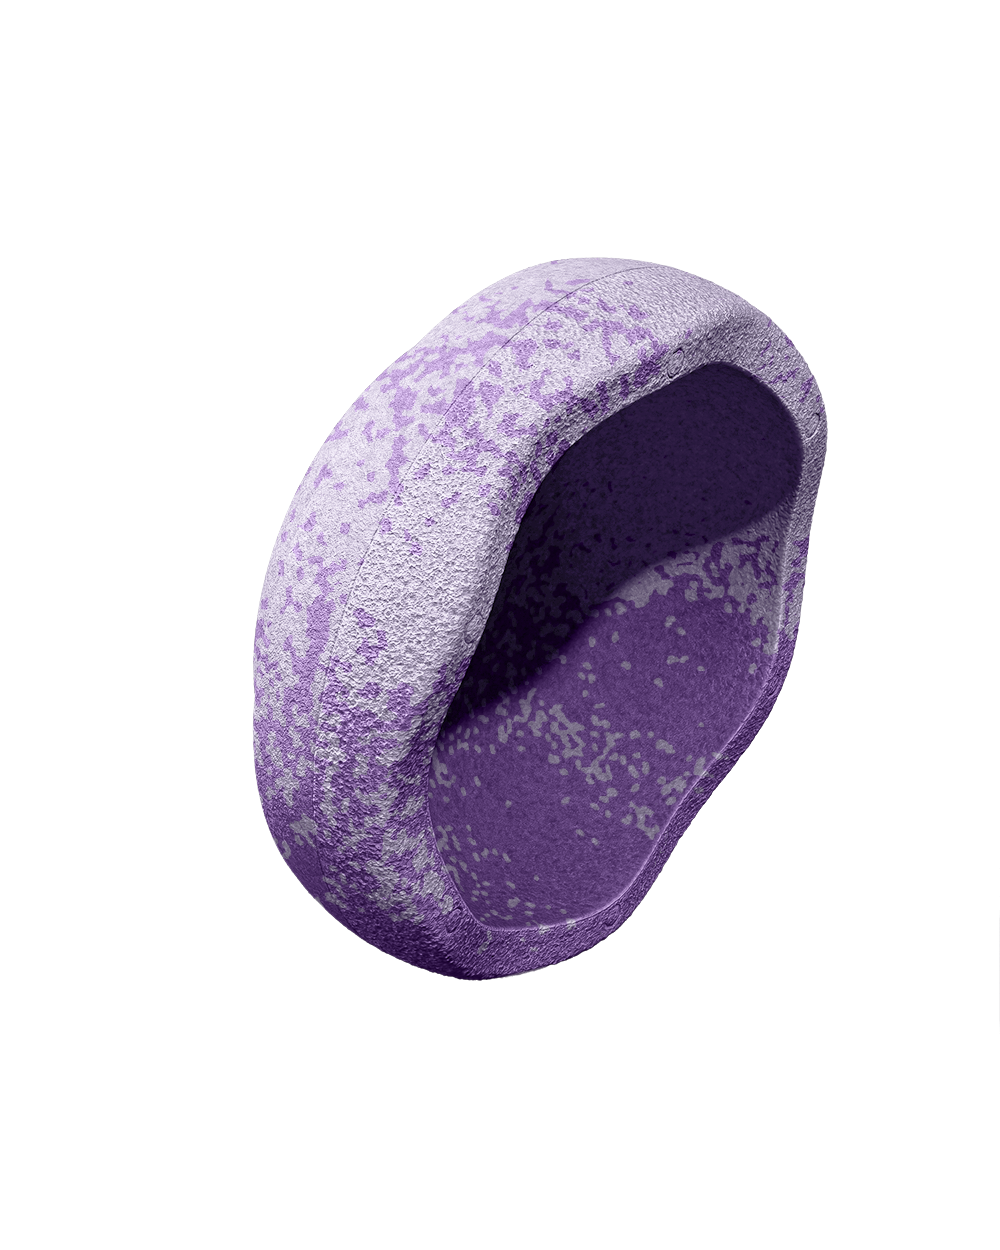 Stapelstein Stacking Stone in Fusion Purple Limited Edition | Children of the Wild